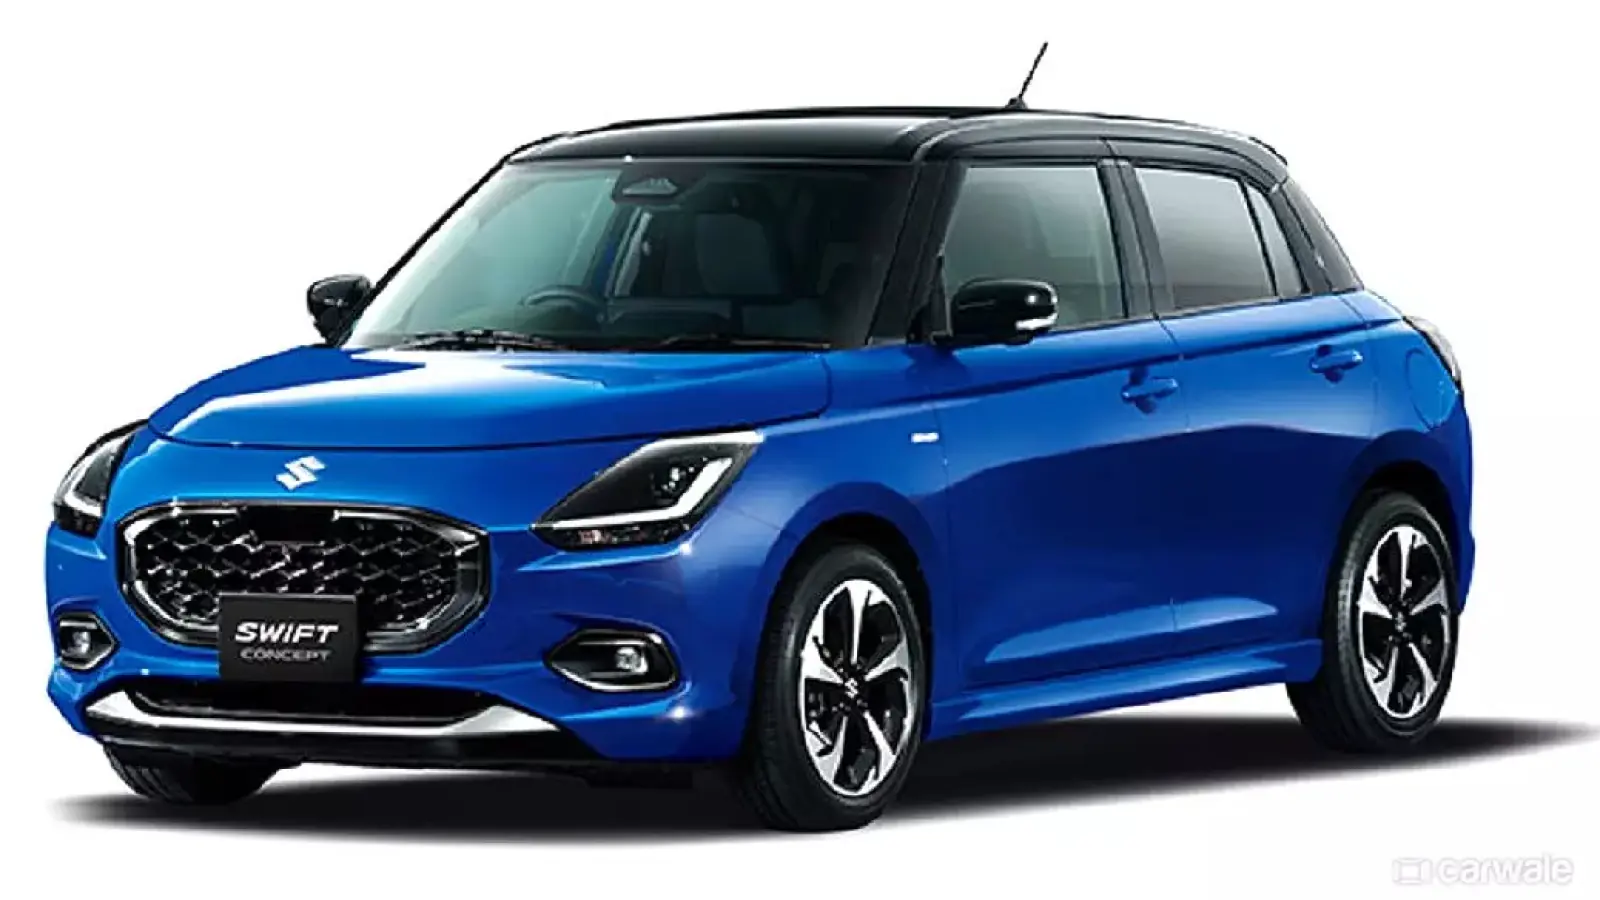 New generation Maruti Swift will be launched soon, what changes will it come with, know details